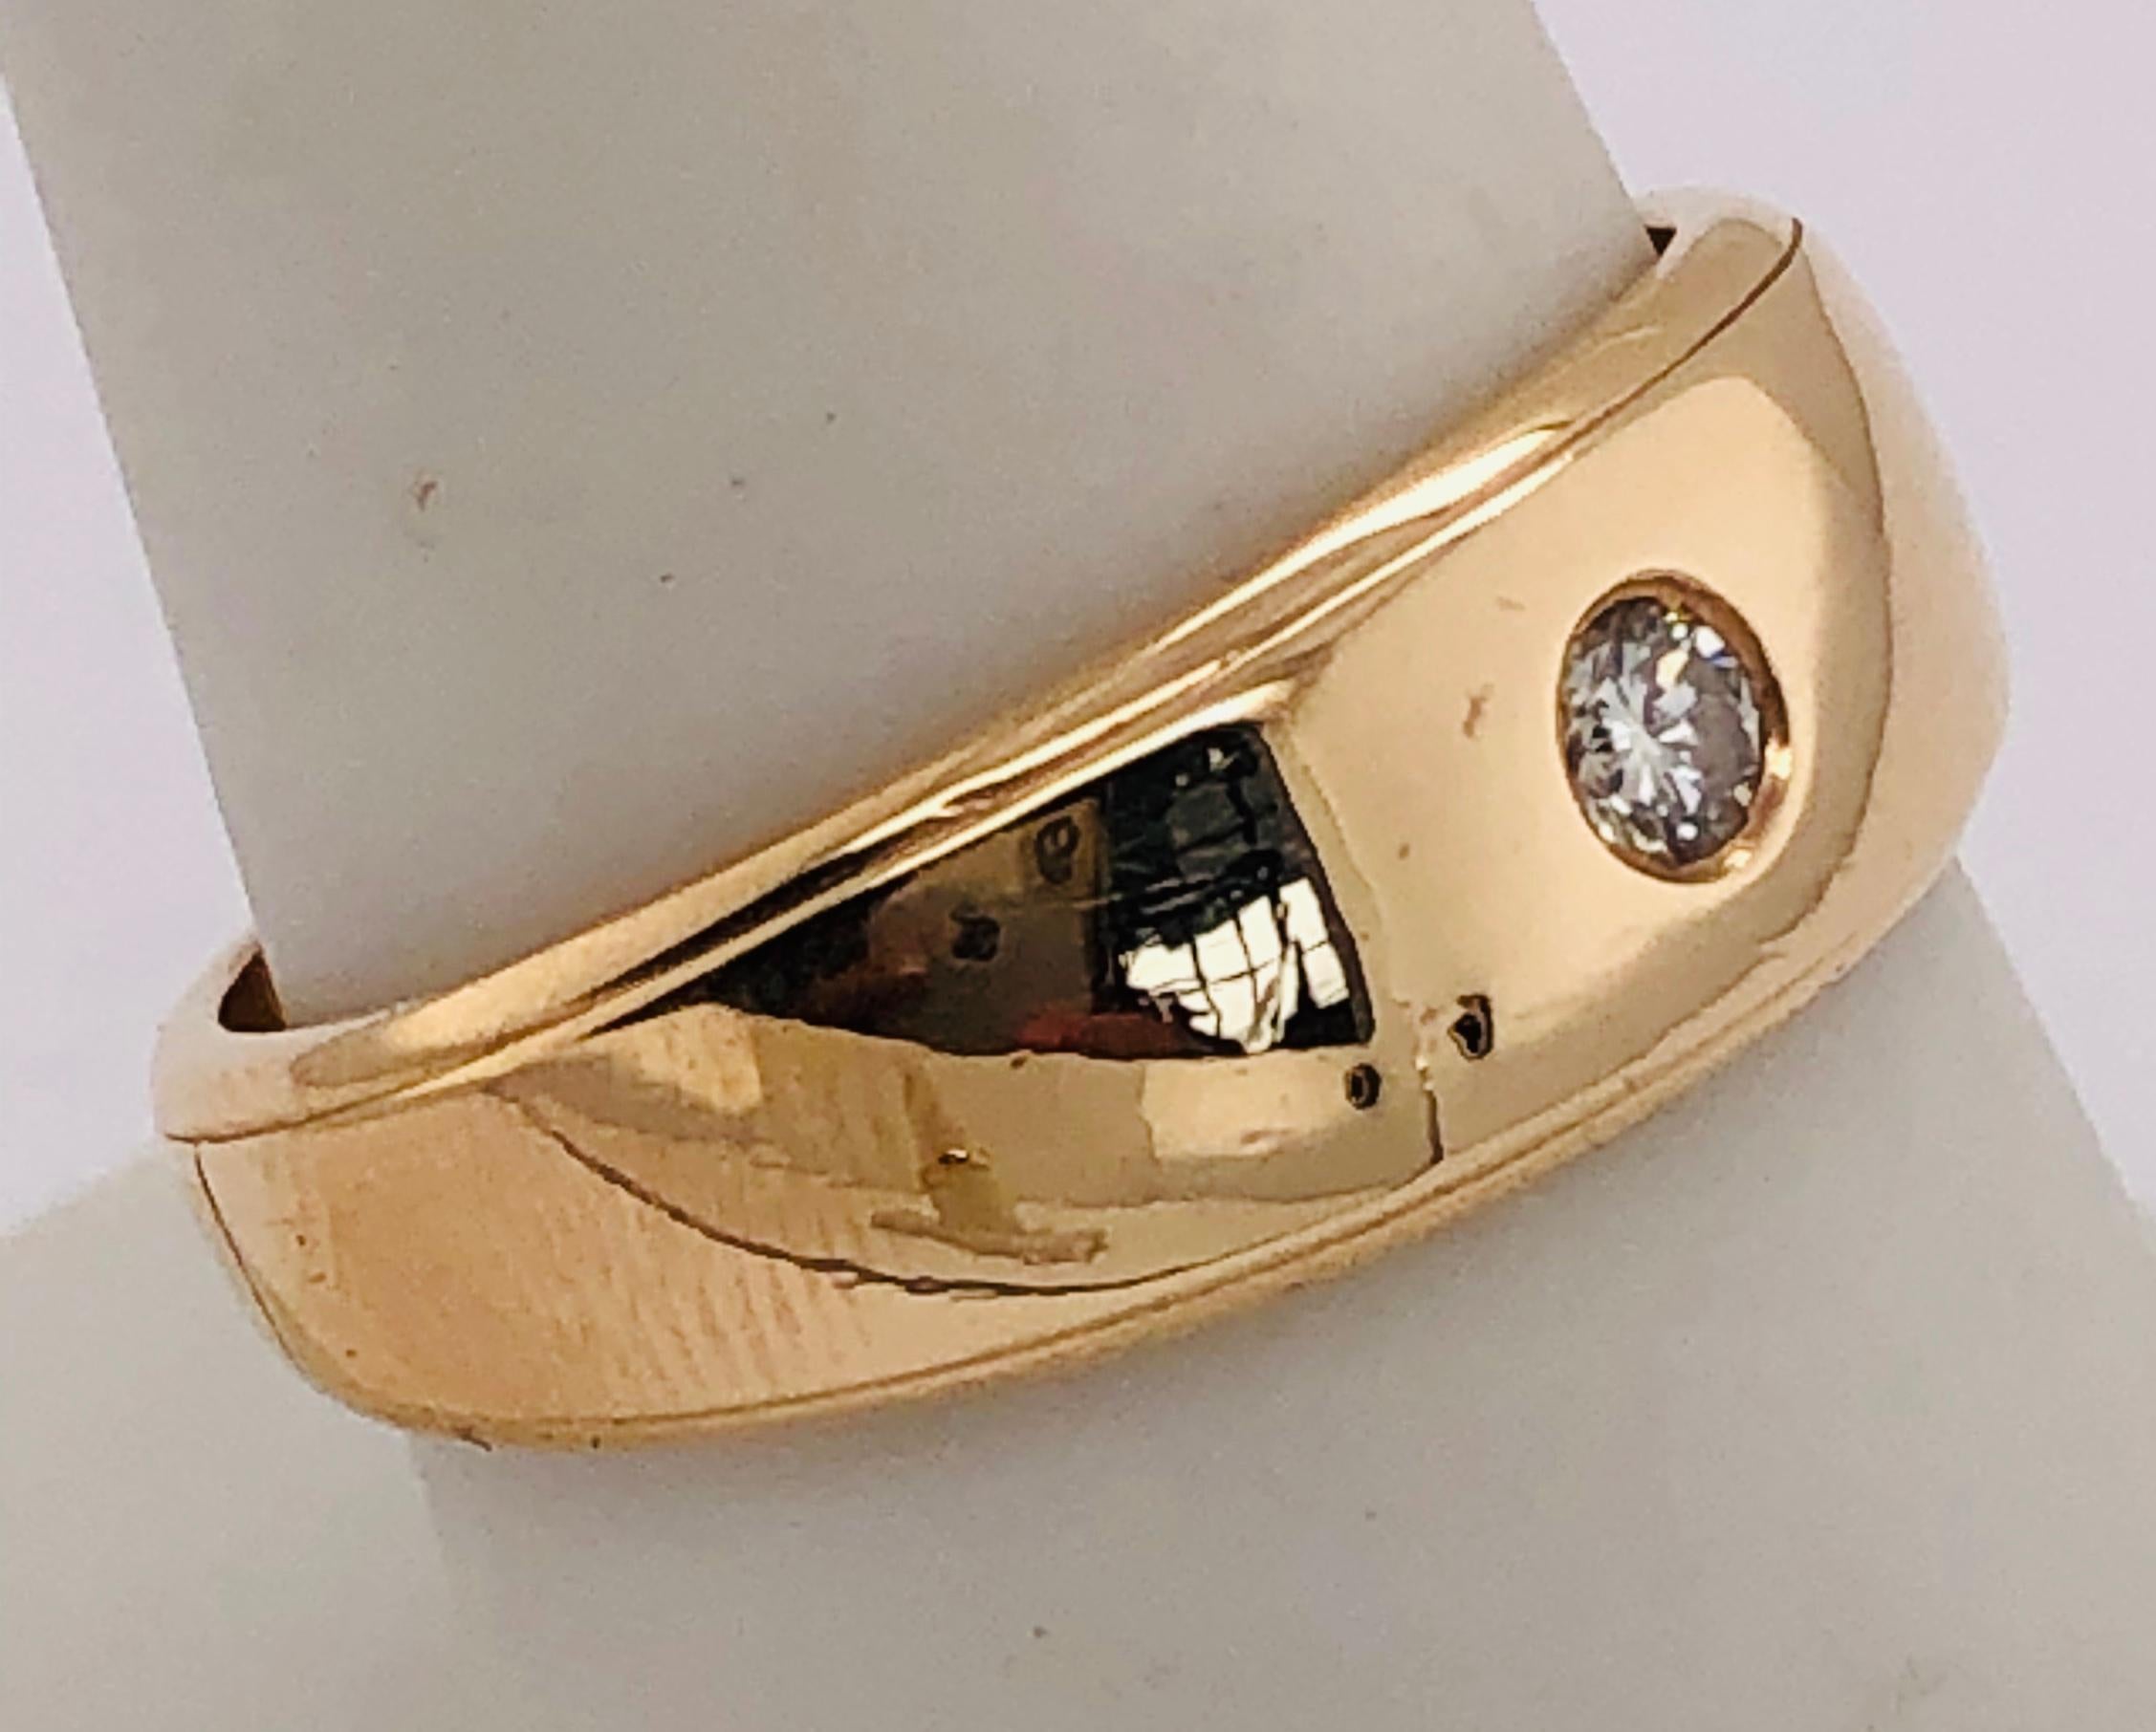 14Kt Yellow Gold Band Ring with Diamond 0.15 Total Diamond Weight.
Size 9 with 6.59 grams total weight 

Change the tag to 225